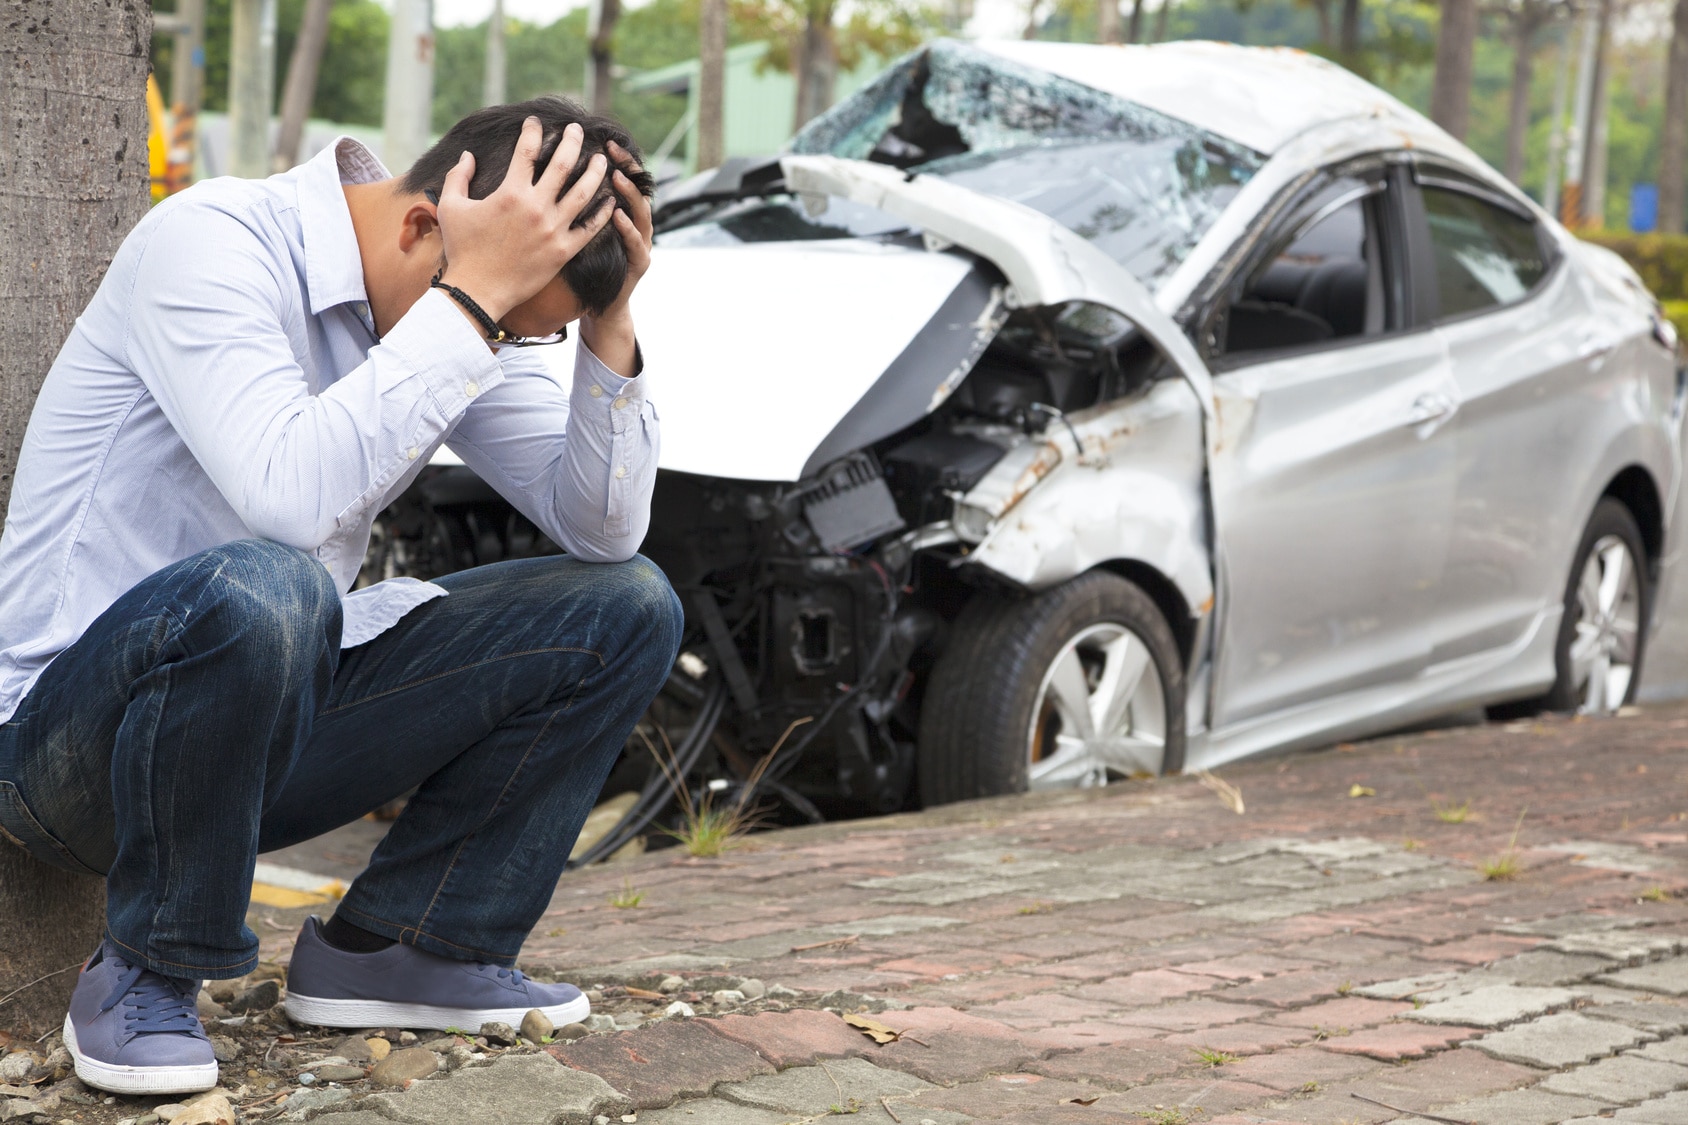 How Does The City Of Houston Handle Minor Car Accidents?